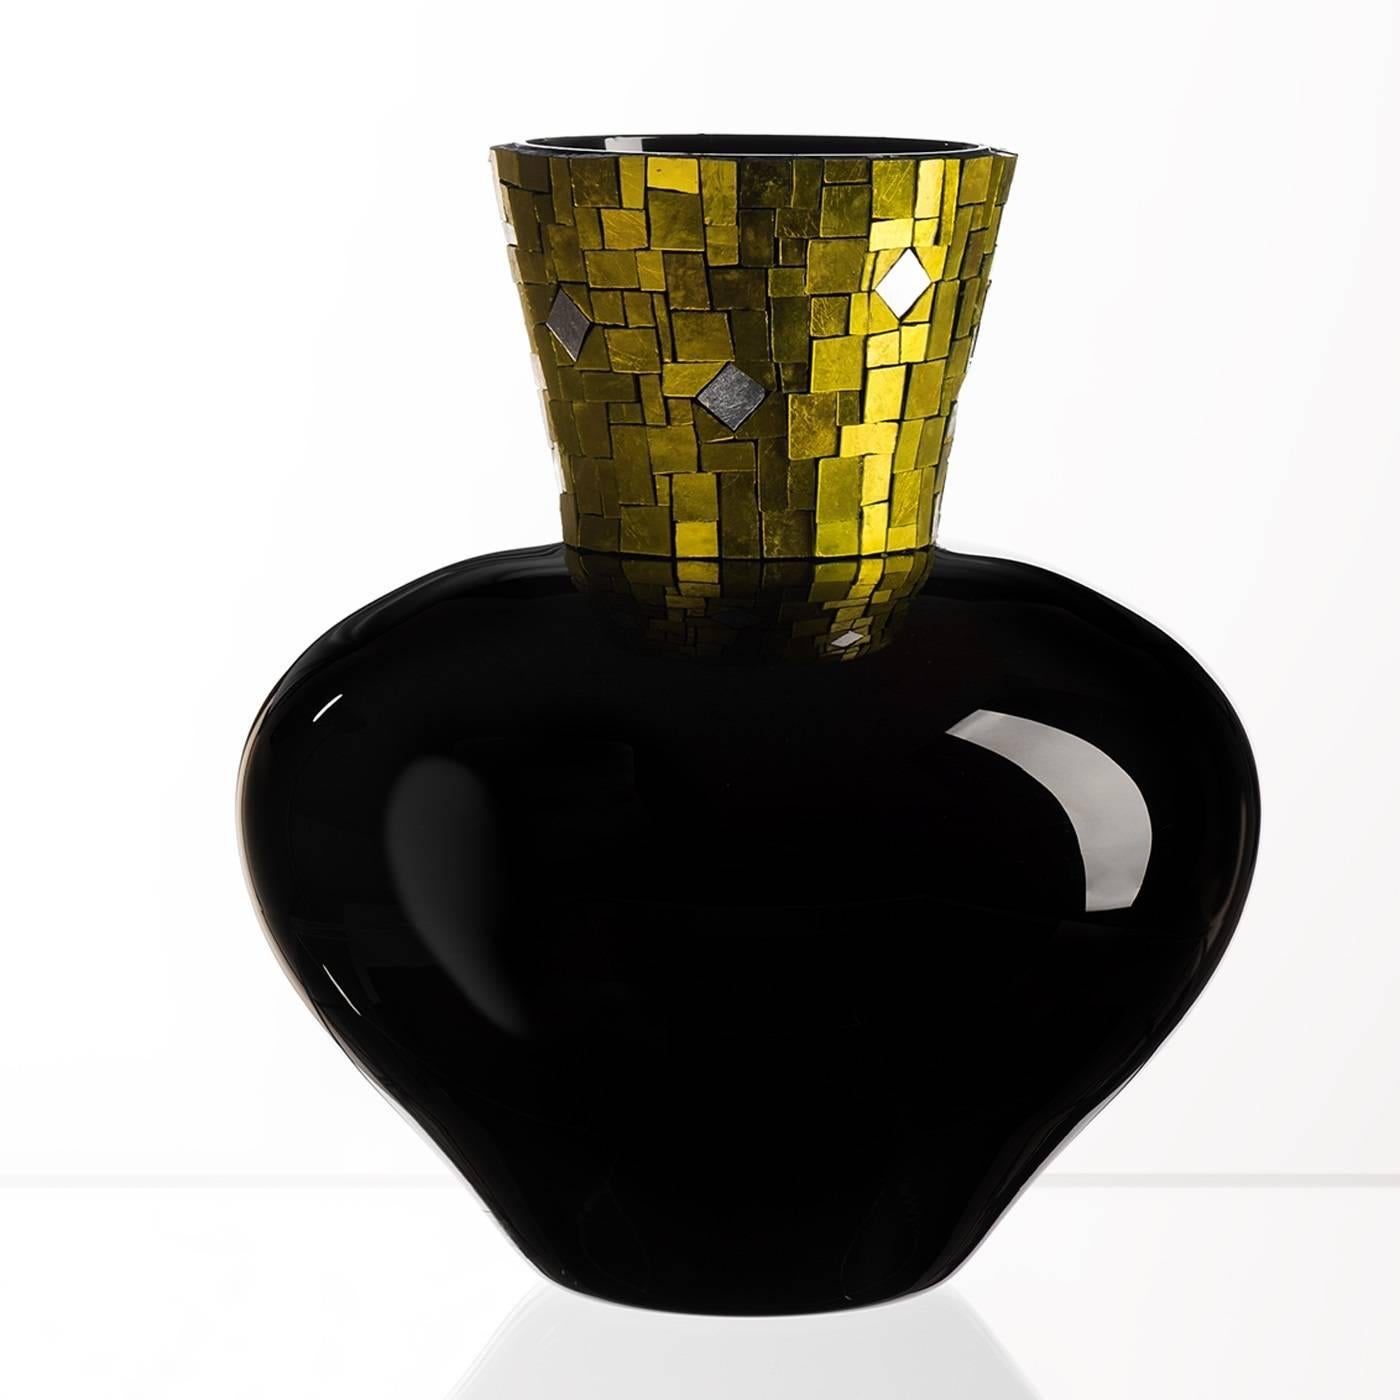 The sinuous shape of this sophisticated Murano mouth-blown glass vase part of the Design Collection is enhanced by its black color, while the mosaic detail that covers its neck adds a dramatic, eye-catching effect. The geometric design is created by